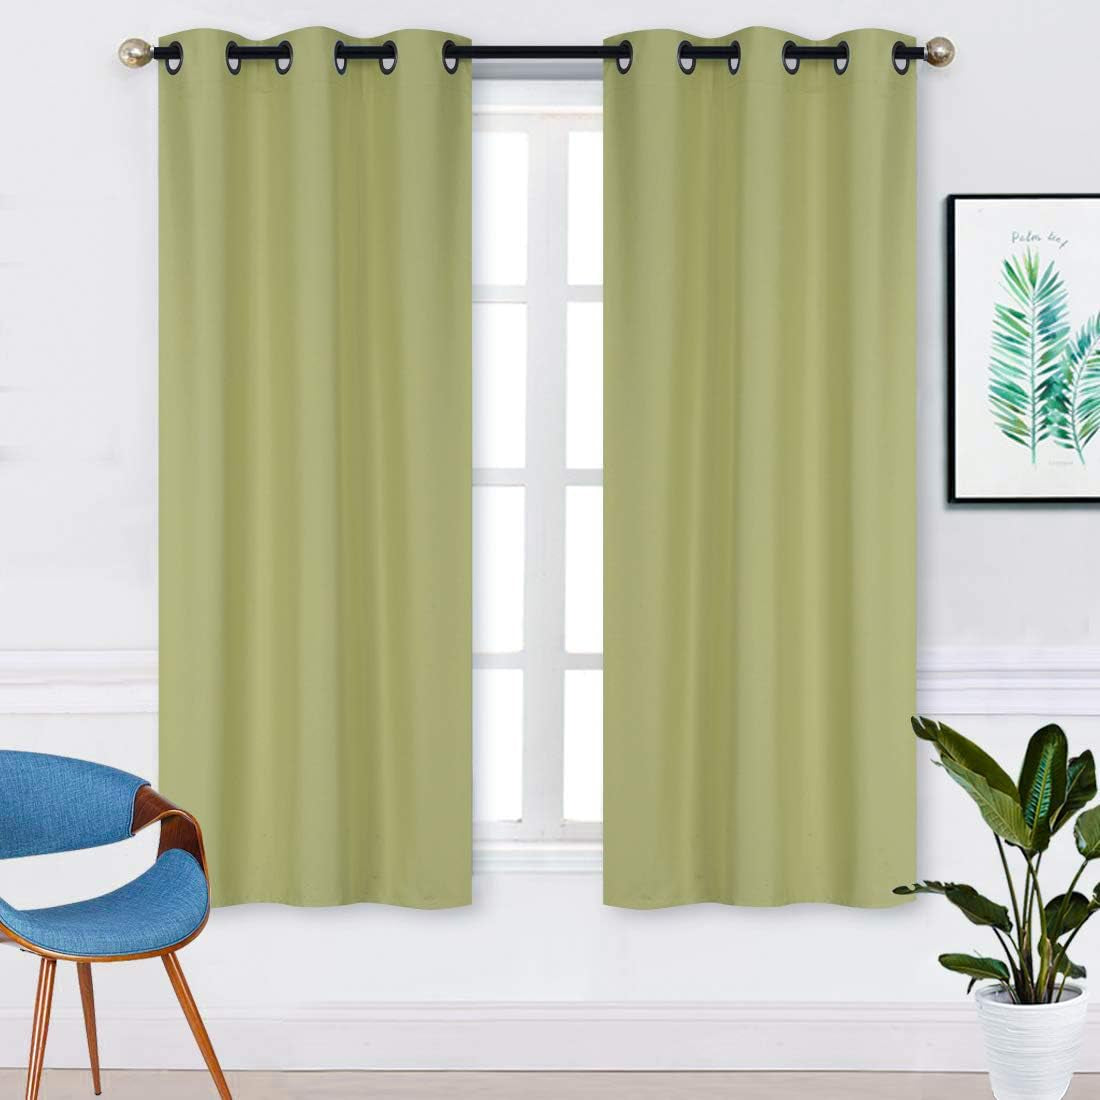 Home Collection 2 Panels 100% Blackout Curtain Set Solid Color with Rod Pocket Grommet Drapes for Kitchen, Dinning Room, Bathroom, Bedroom,Living Room Window New (74” Wide X 62” Long, Ivory)  Kids Zone home Linen Sage 74” Wide X 62” Long 